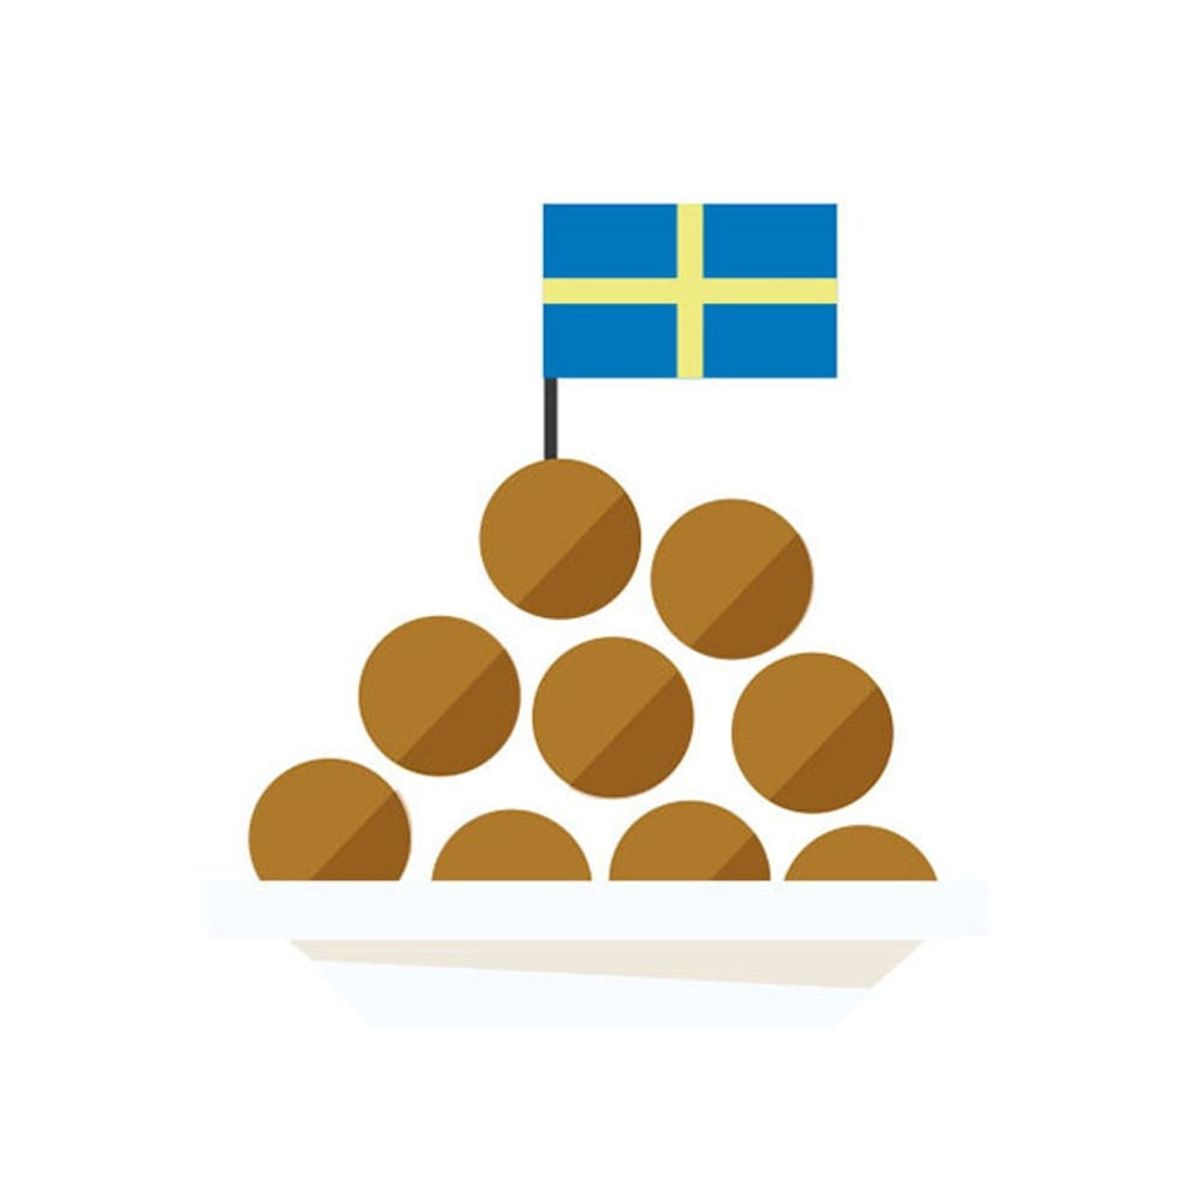 IKEA Now Has Emoji, So Your Life Is Complete